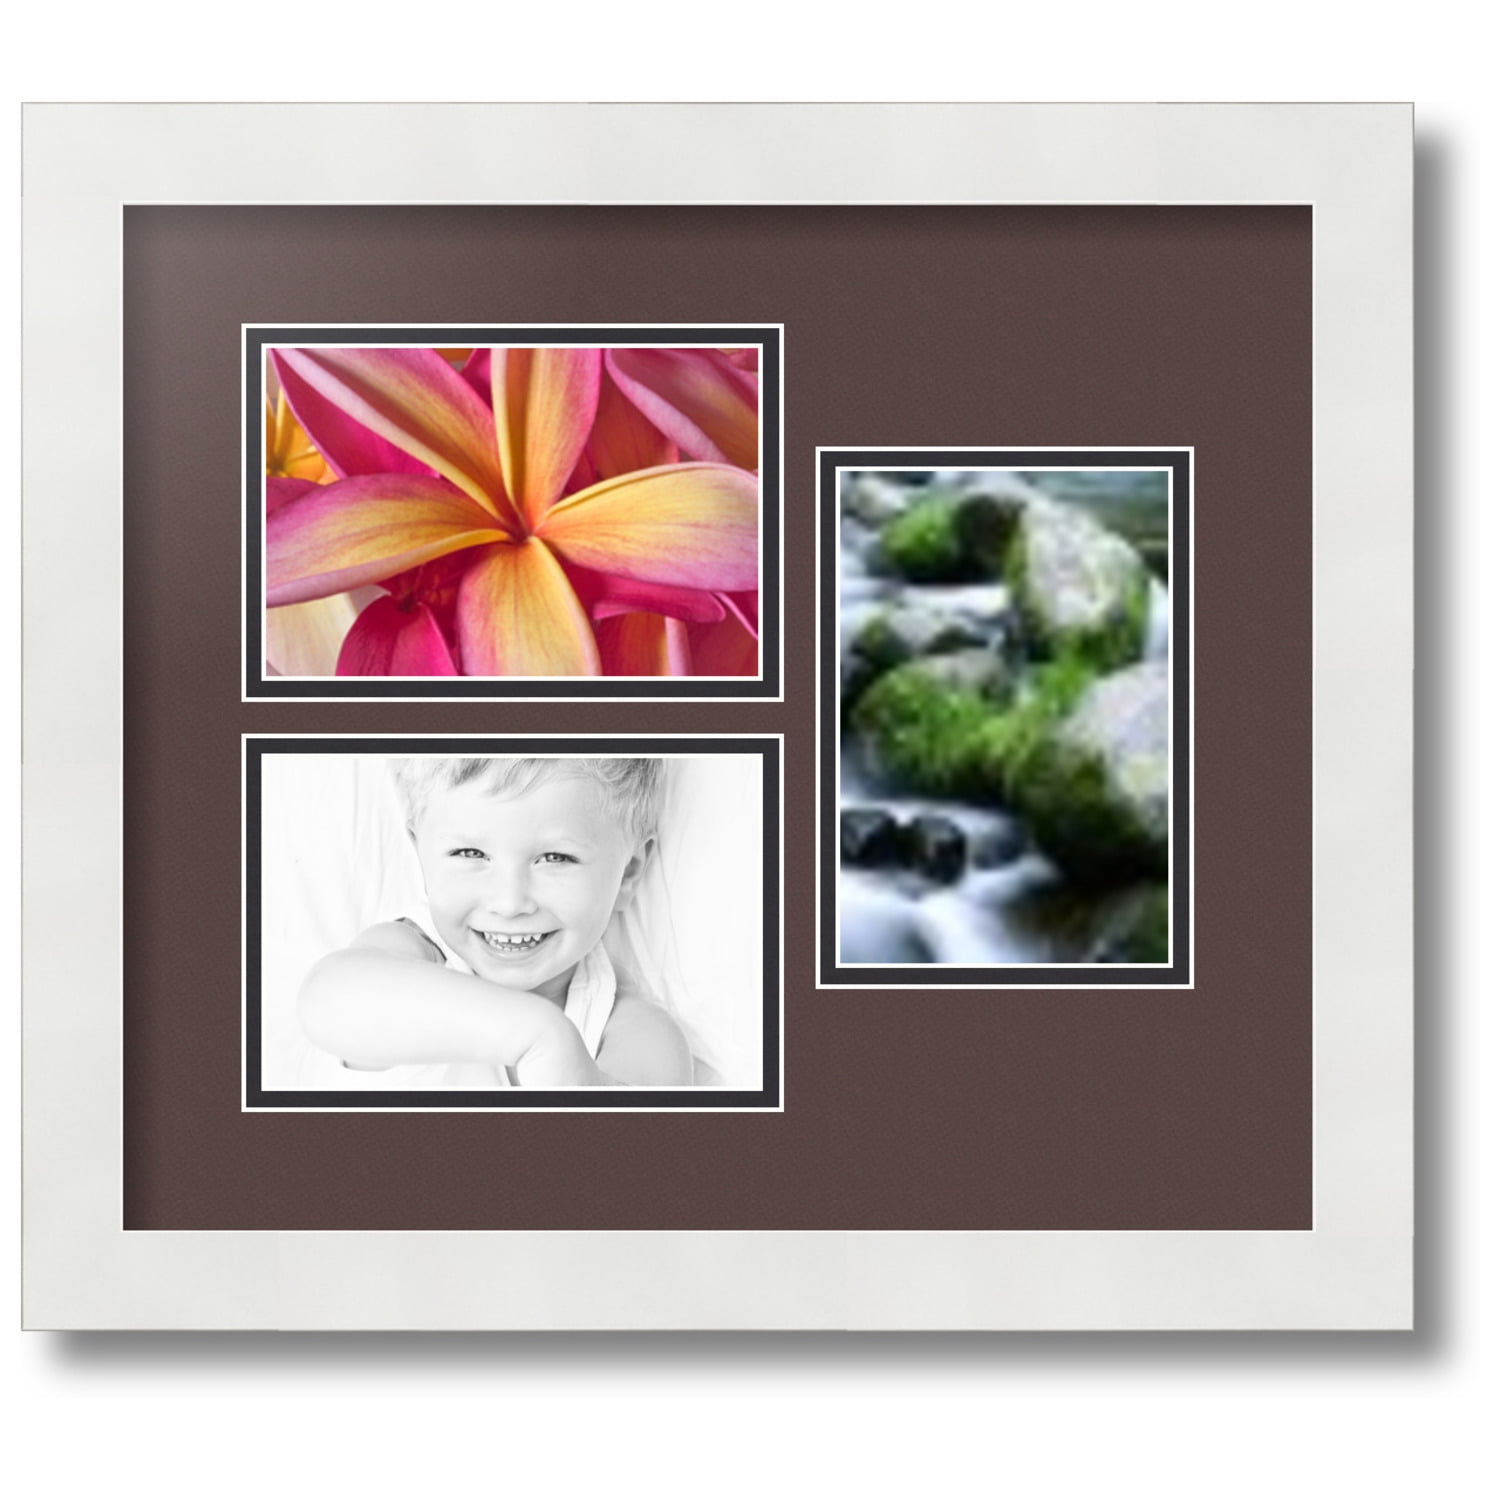 BD ART 17x23 cm (7x9-Inch) - 2 Openings White Collage Picture